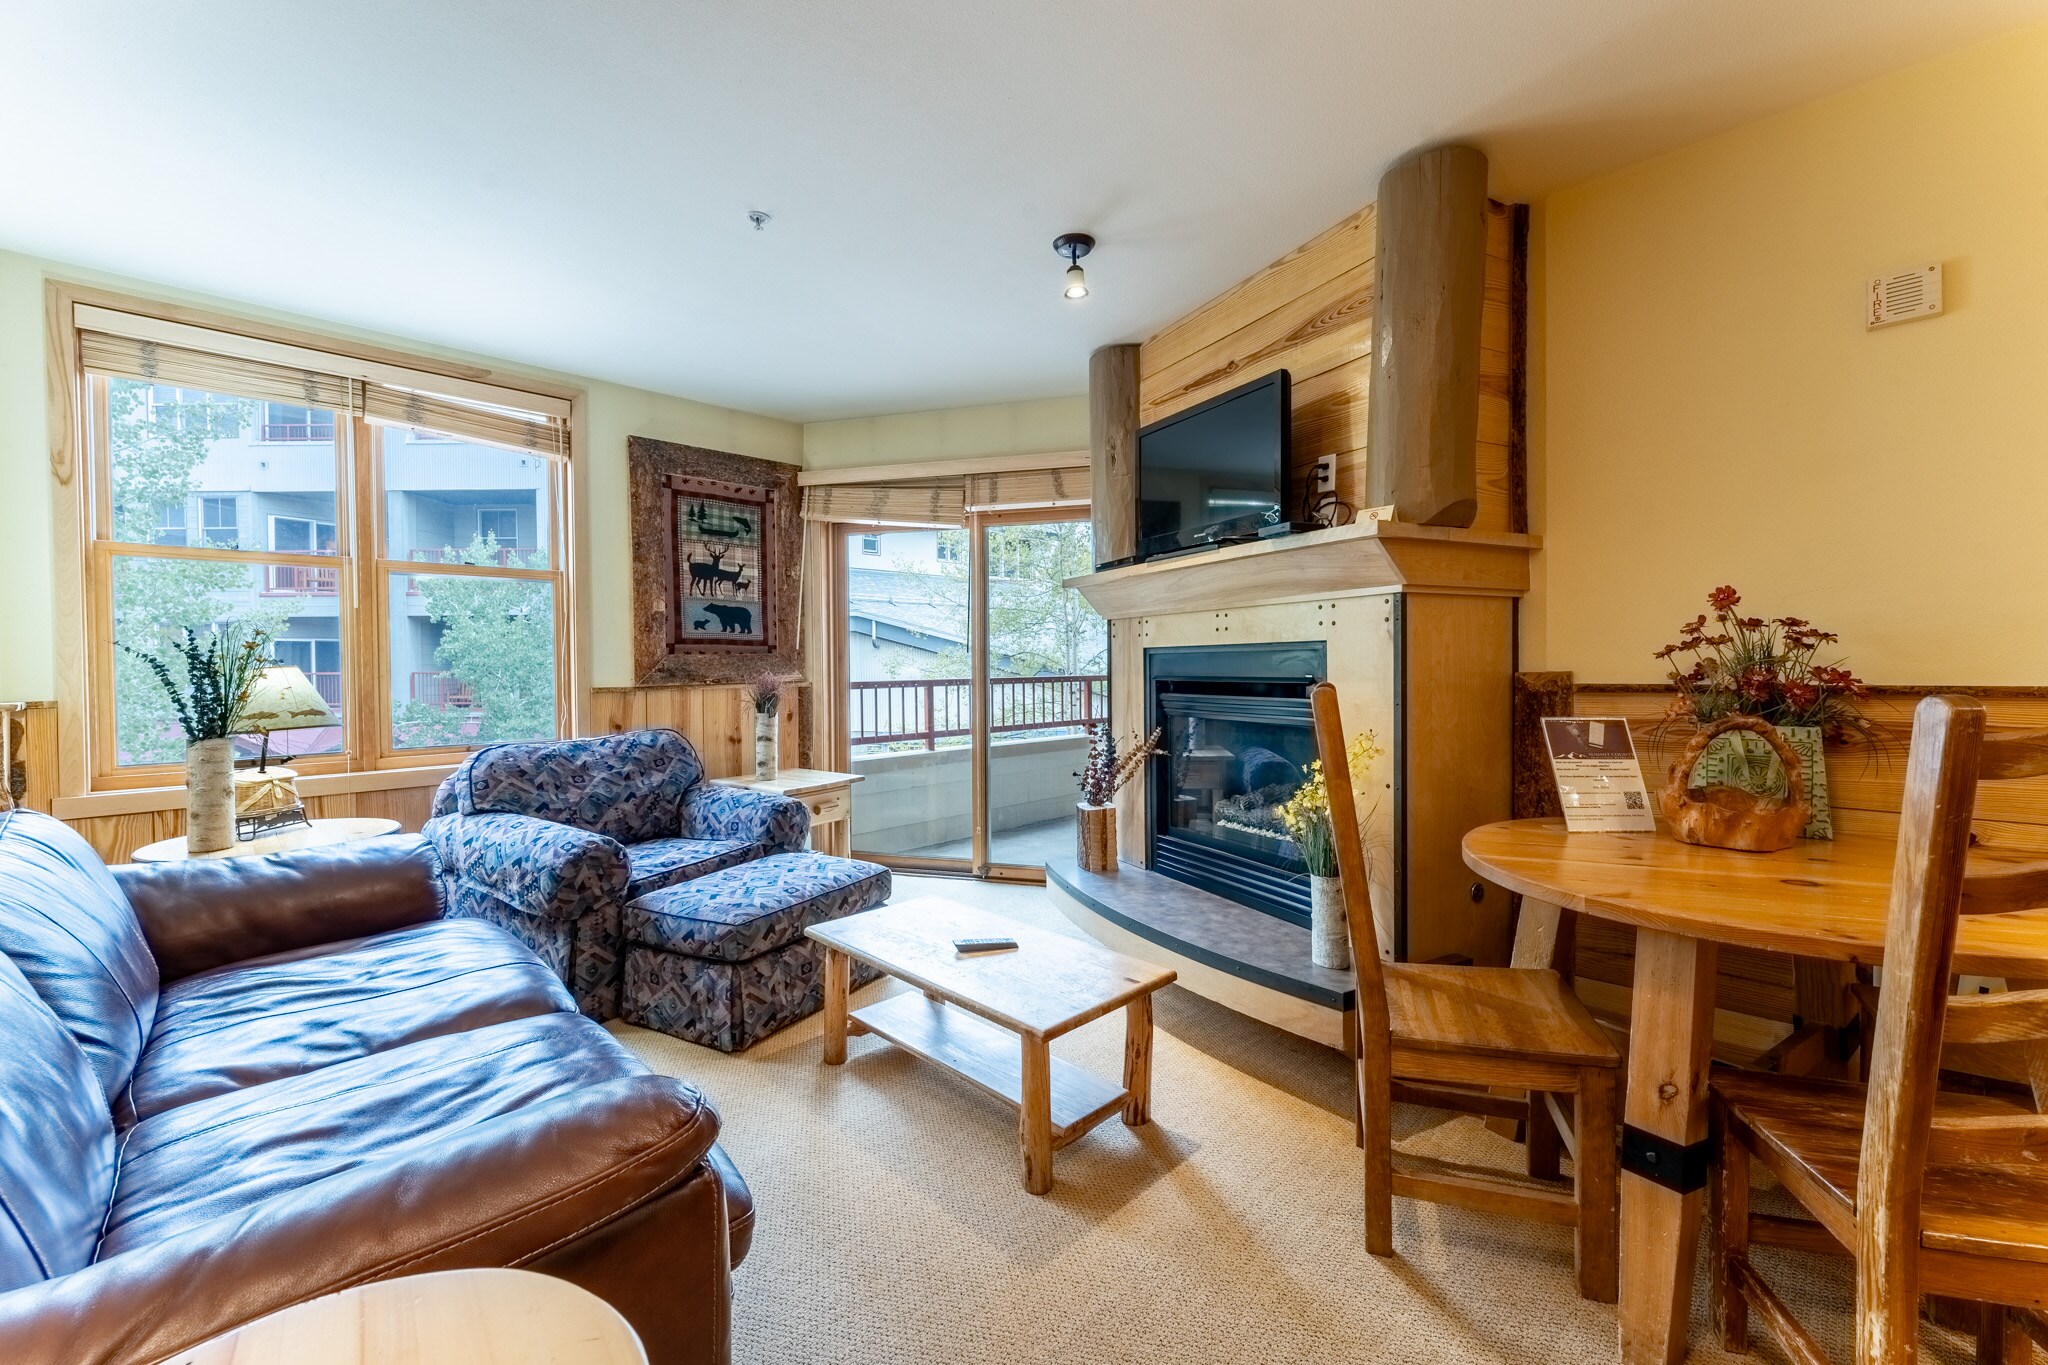 Living area with updated furniture and a gas fireplace.